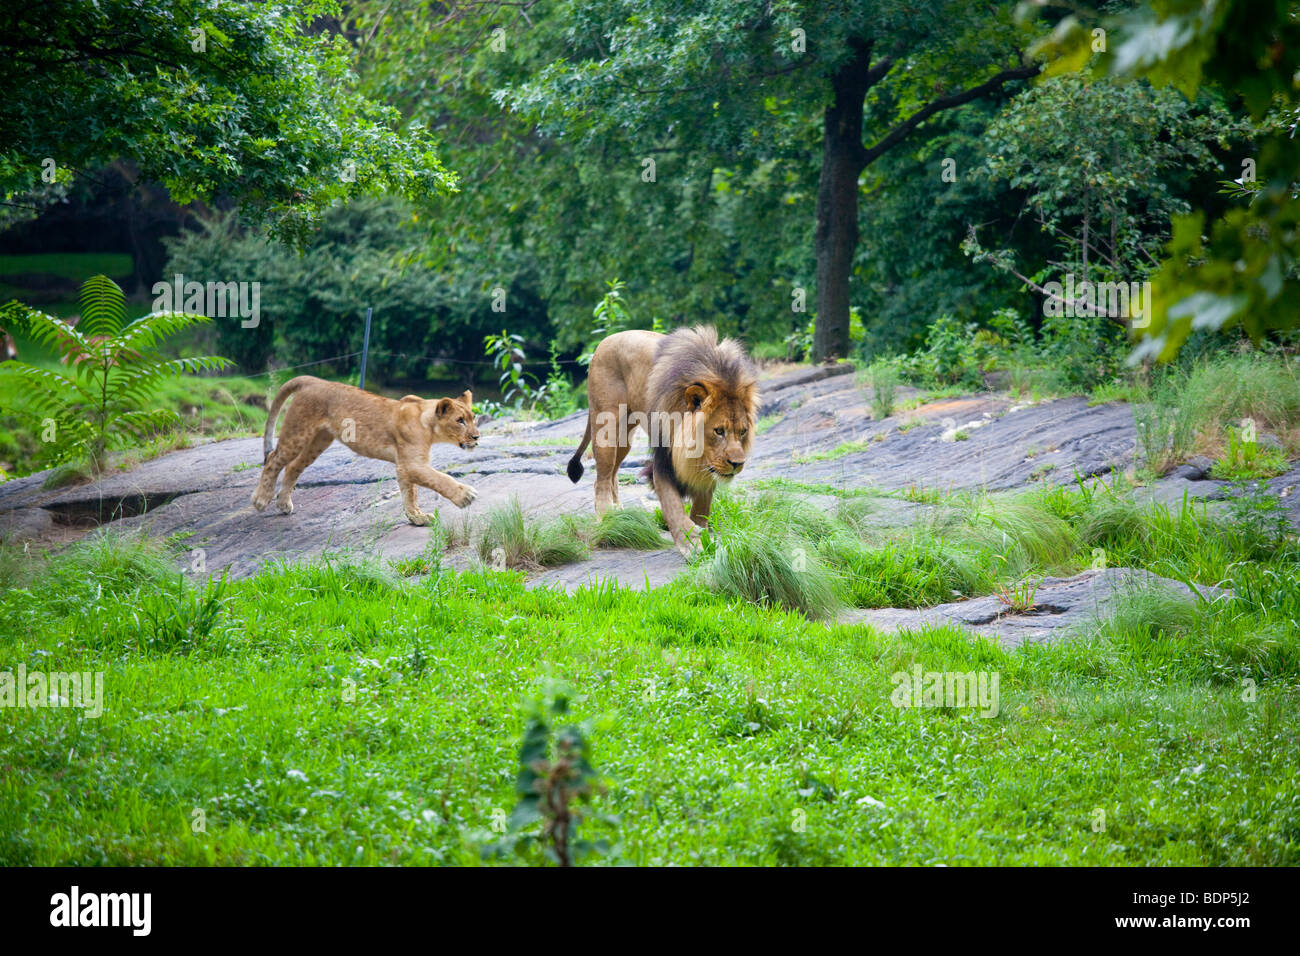 Lion and cub at the Bronx Zoo in New York Stock Photo